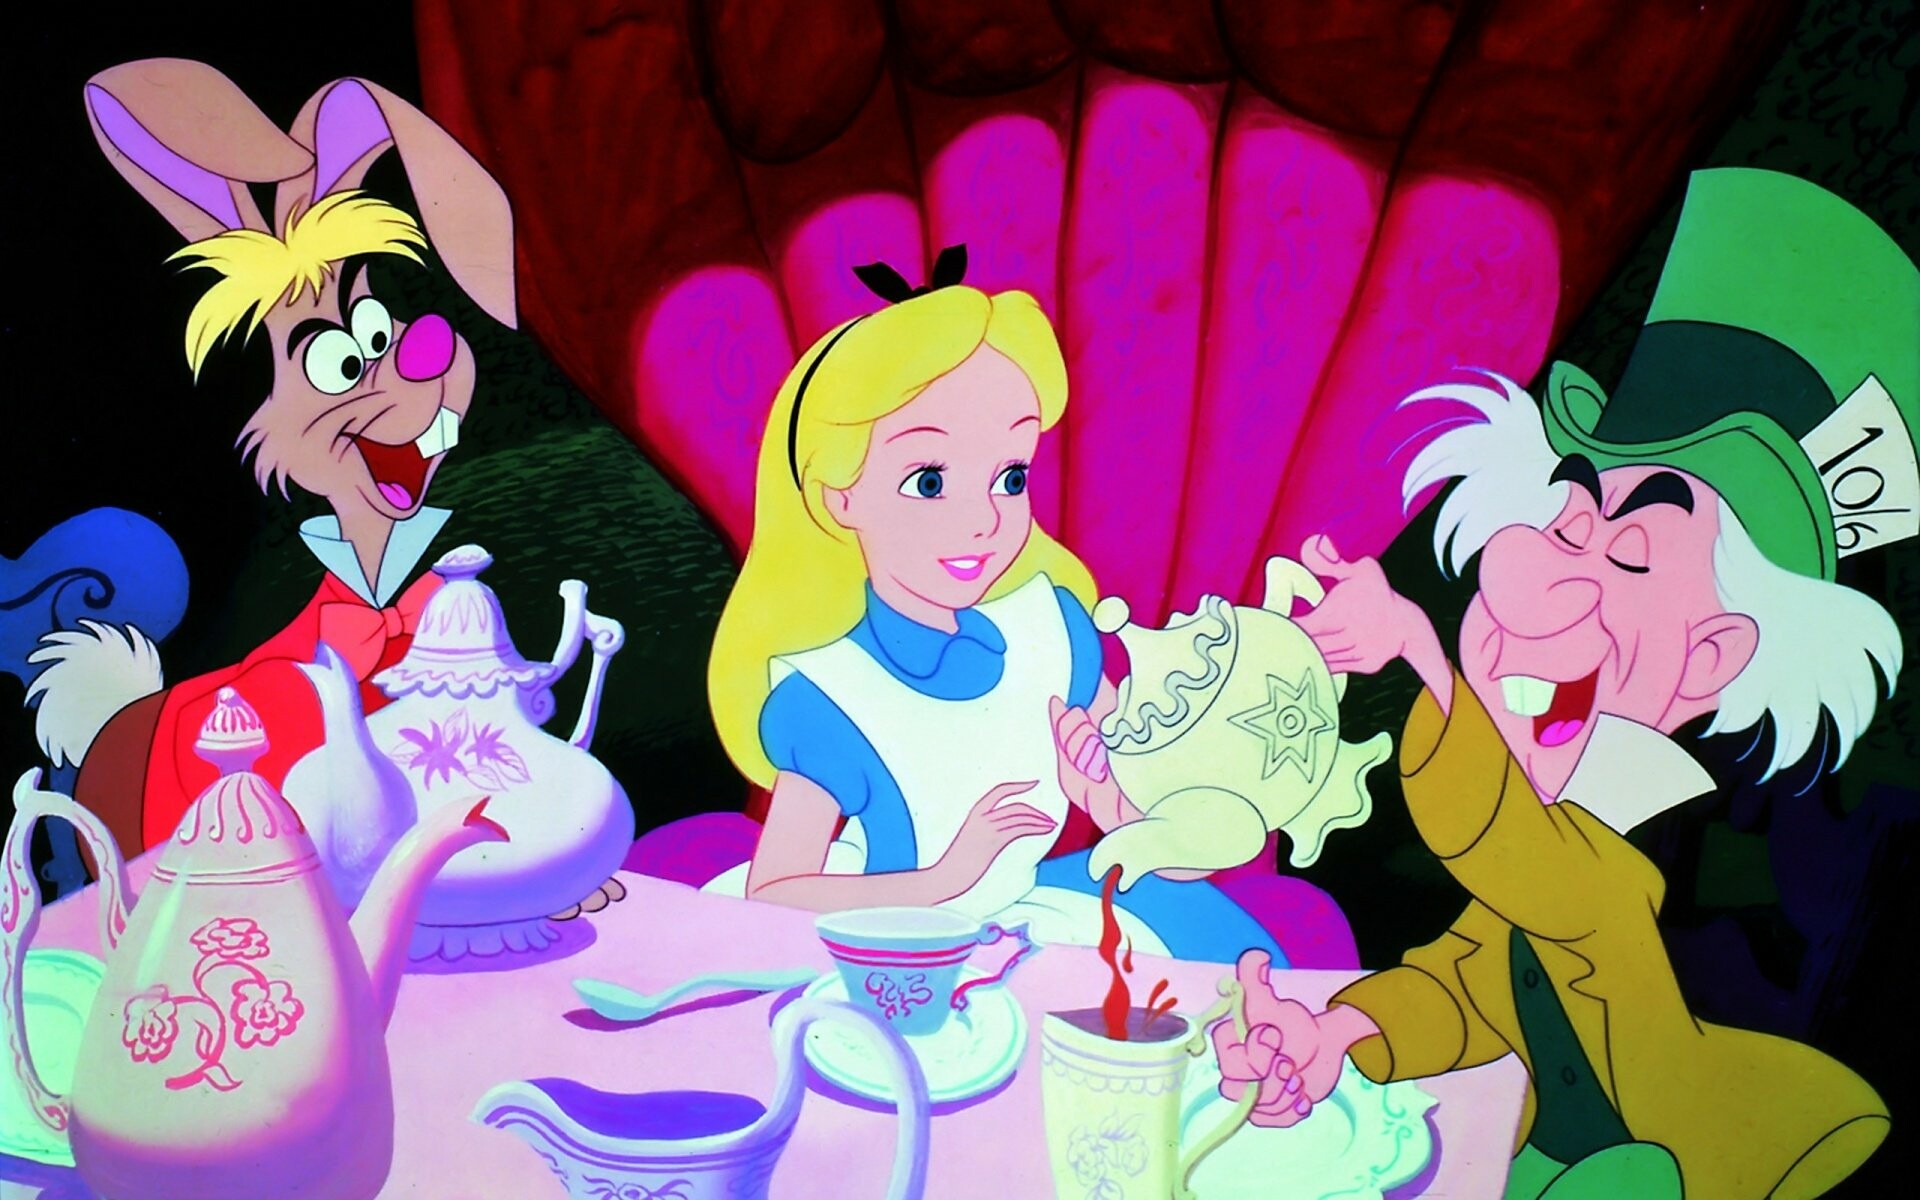 Alice In Wonderland (Cartoon): A story of a young girl who follows a White Rabbit, who disappears down a nearby rabbit hole. 1920x1200 HD Wallpaper.